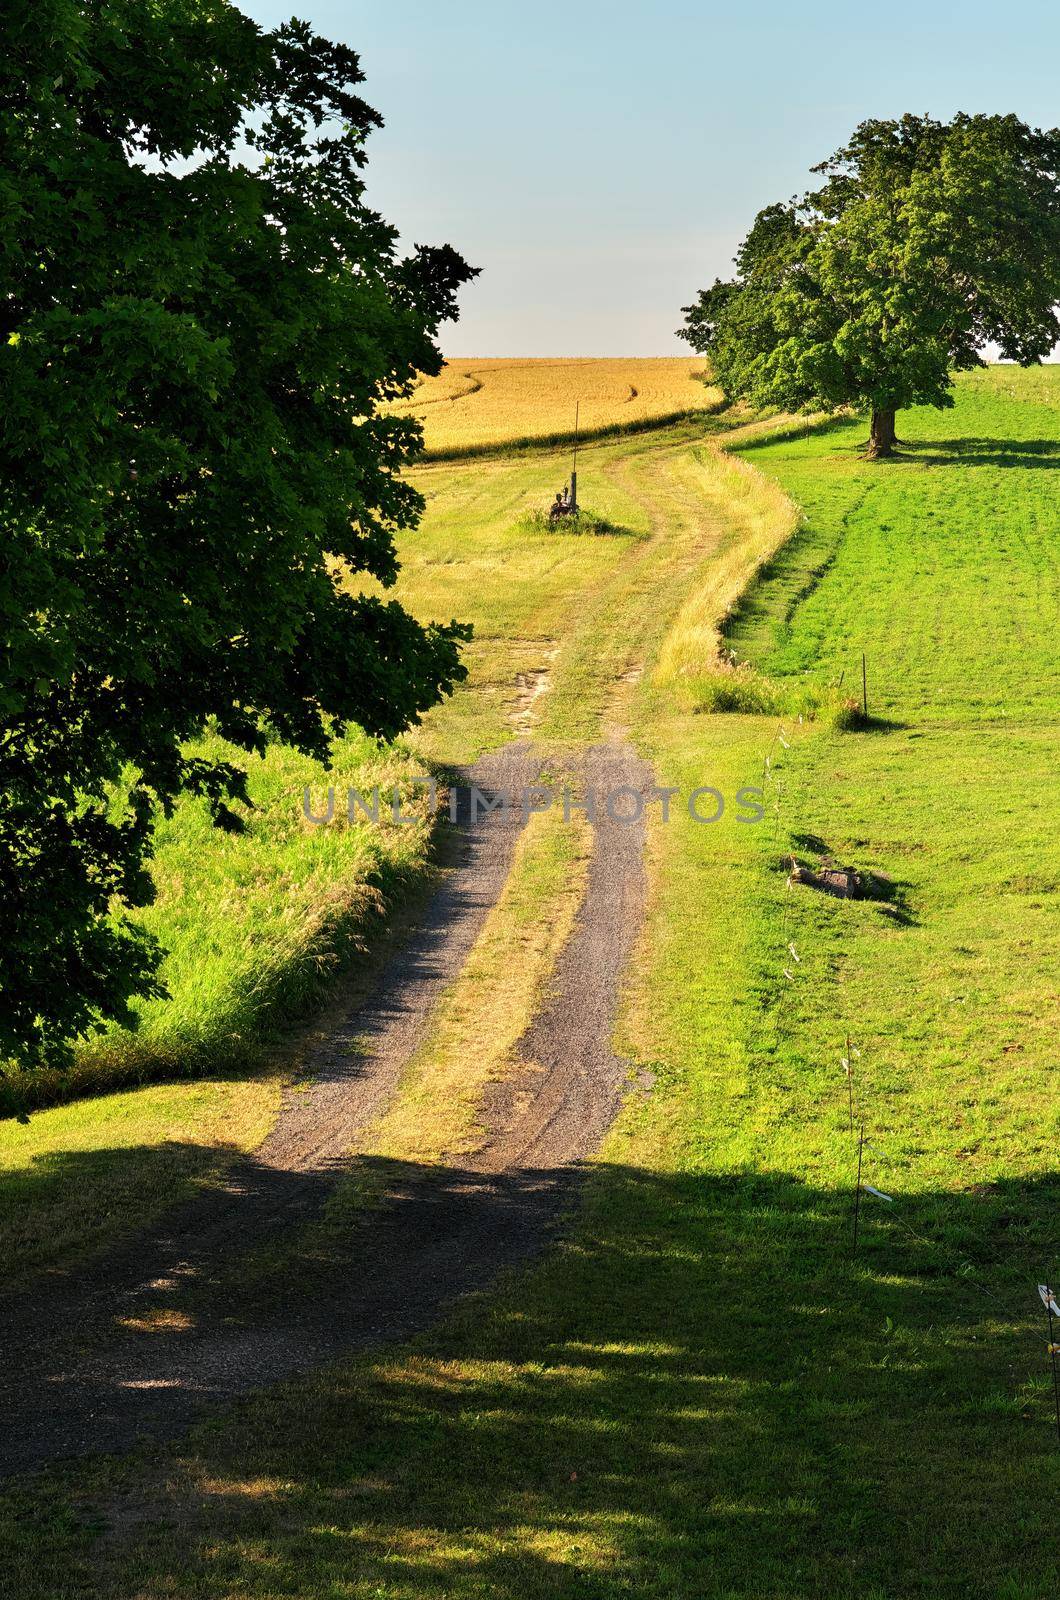 Idyllic Summer Scene with a Dirt Road Running Through Green Pastures Lined with Giant Maple Trees on a Sunny Day. High quality photo